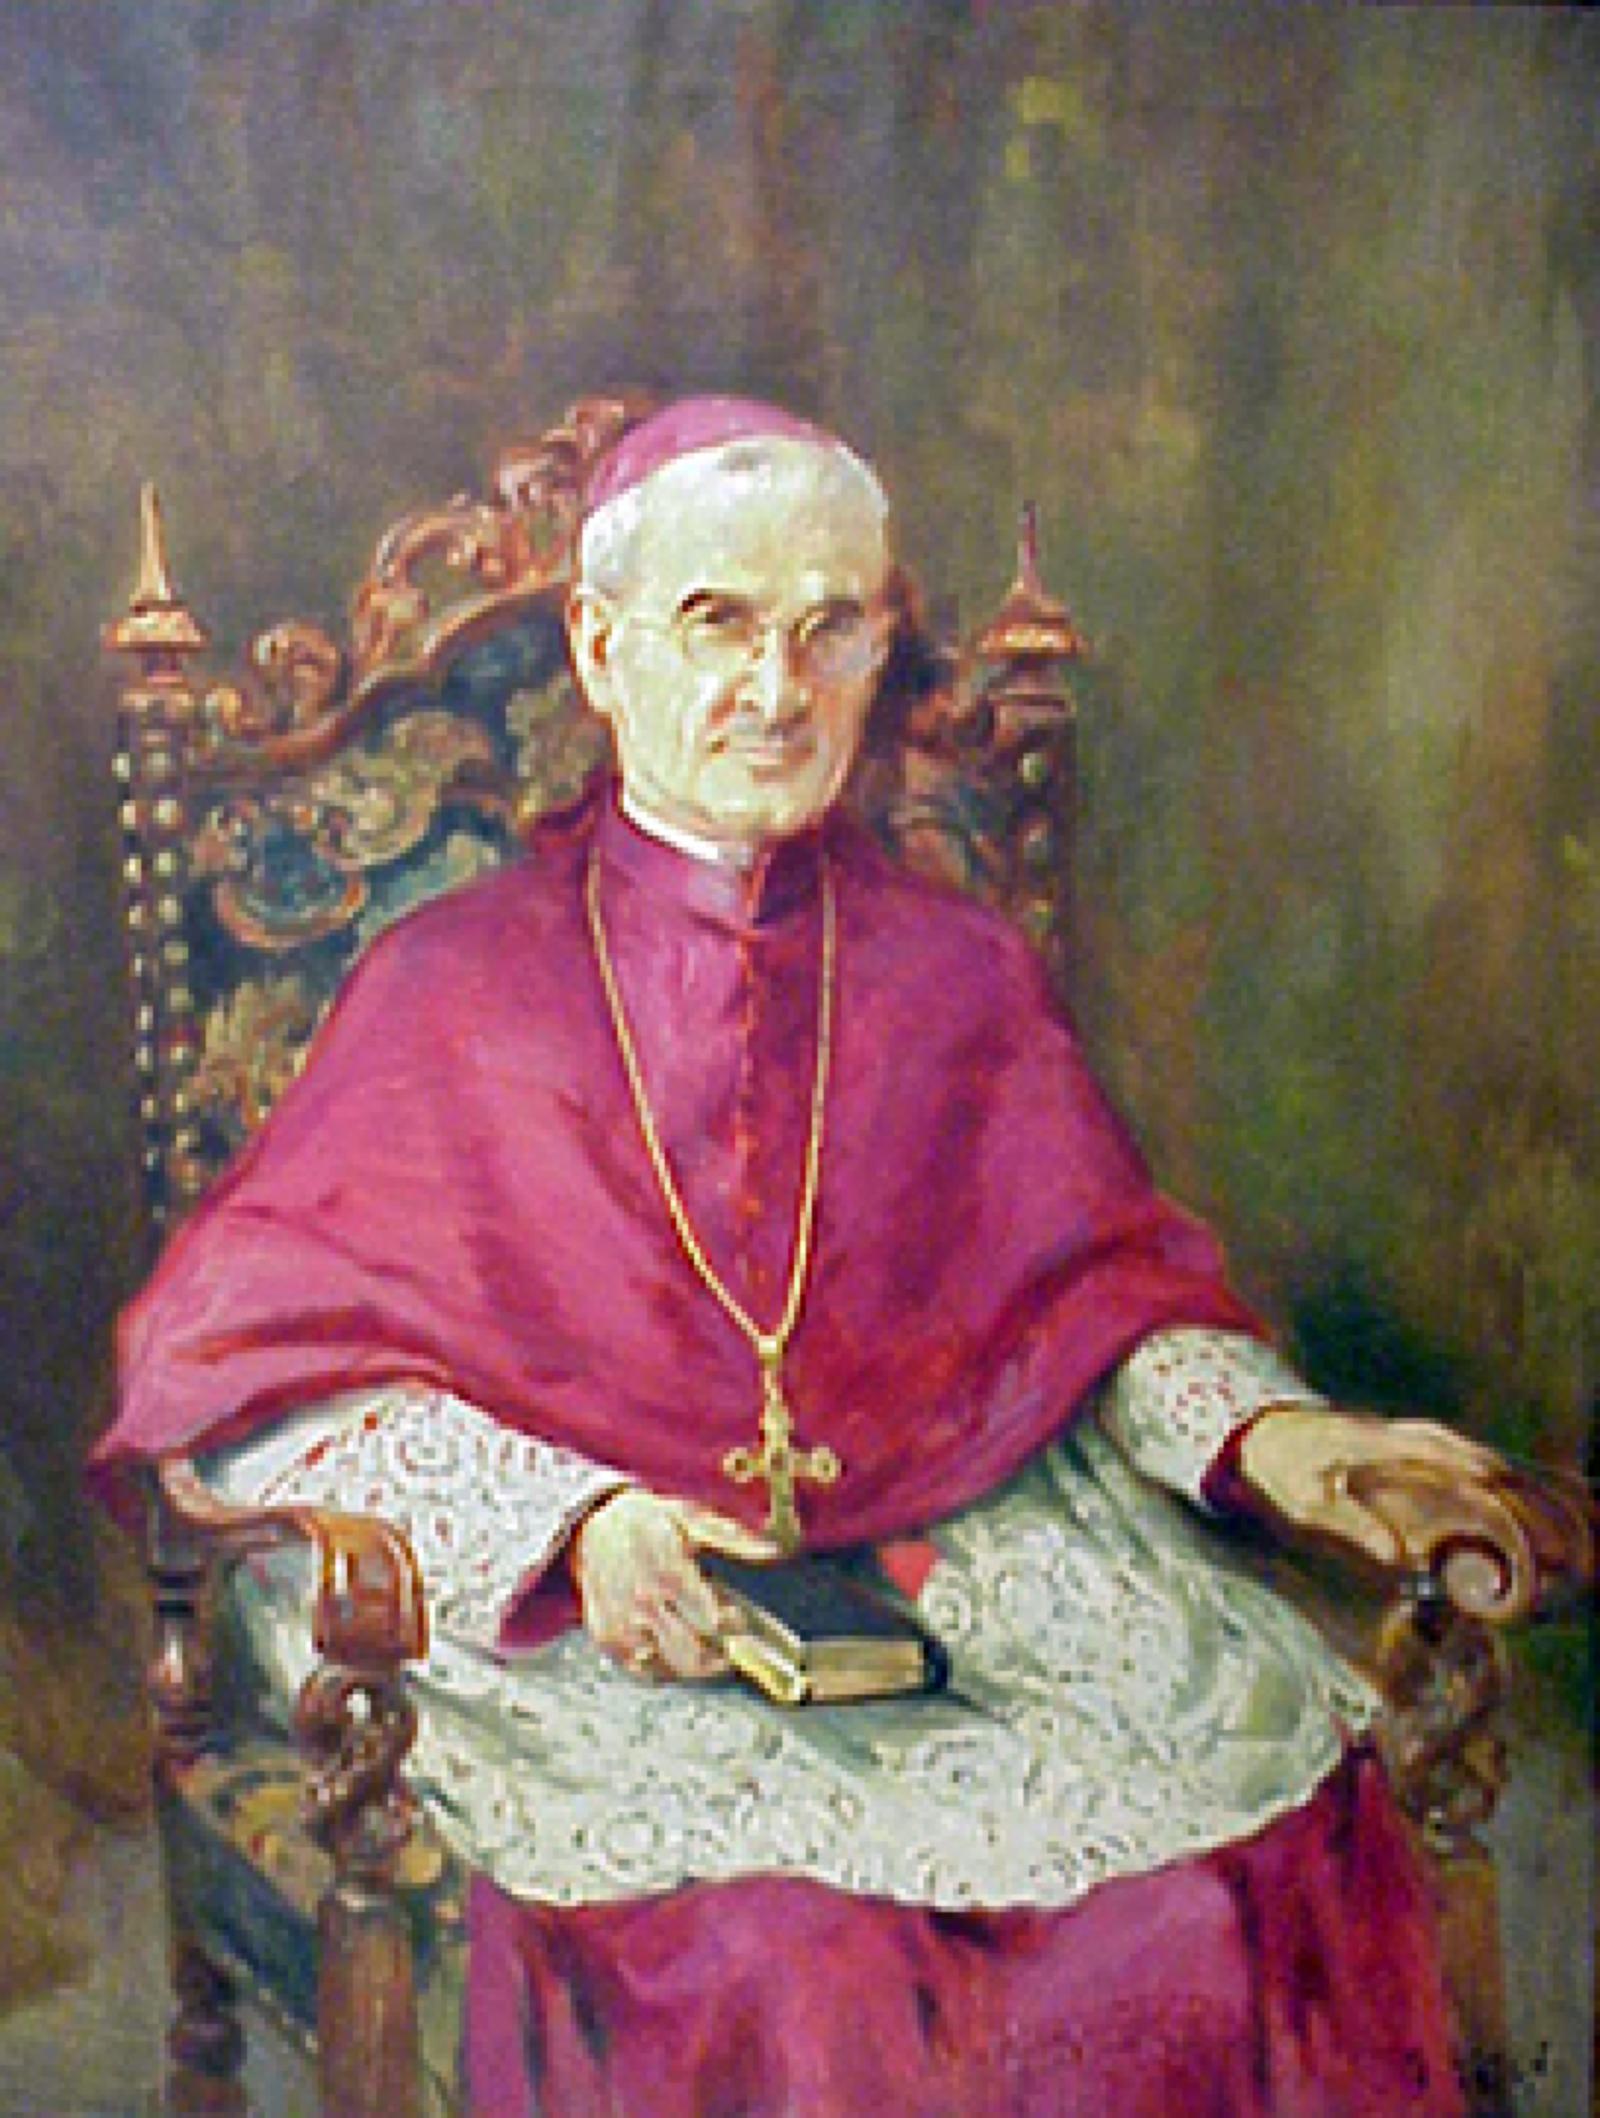 Bishop in red wearing a gold cross sitting in chair with Bible in lap.